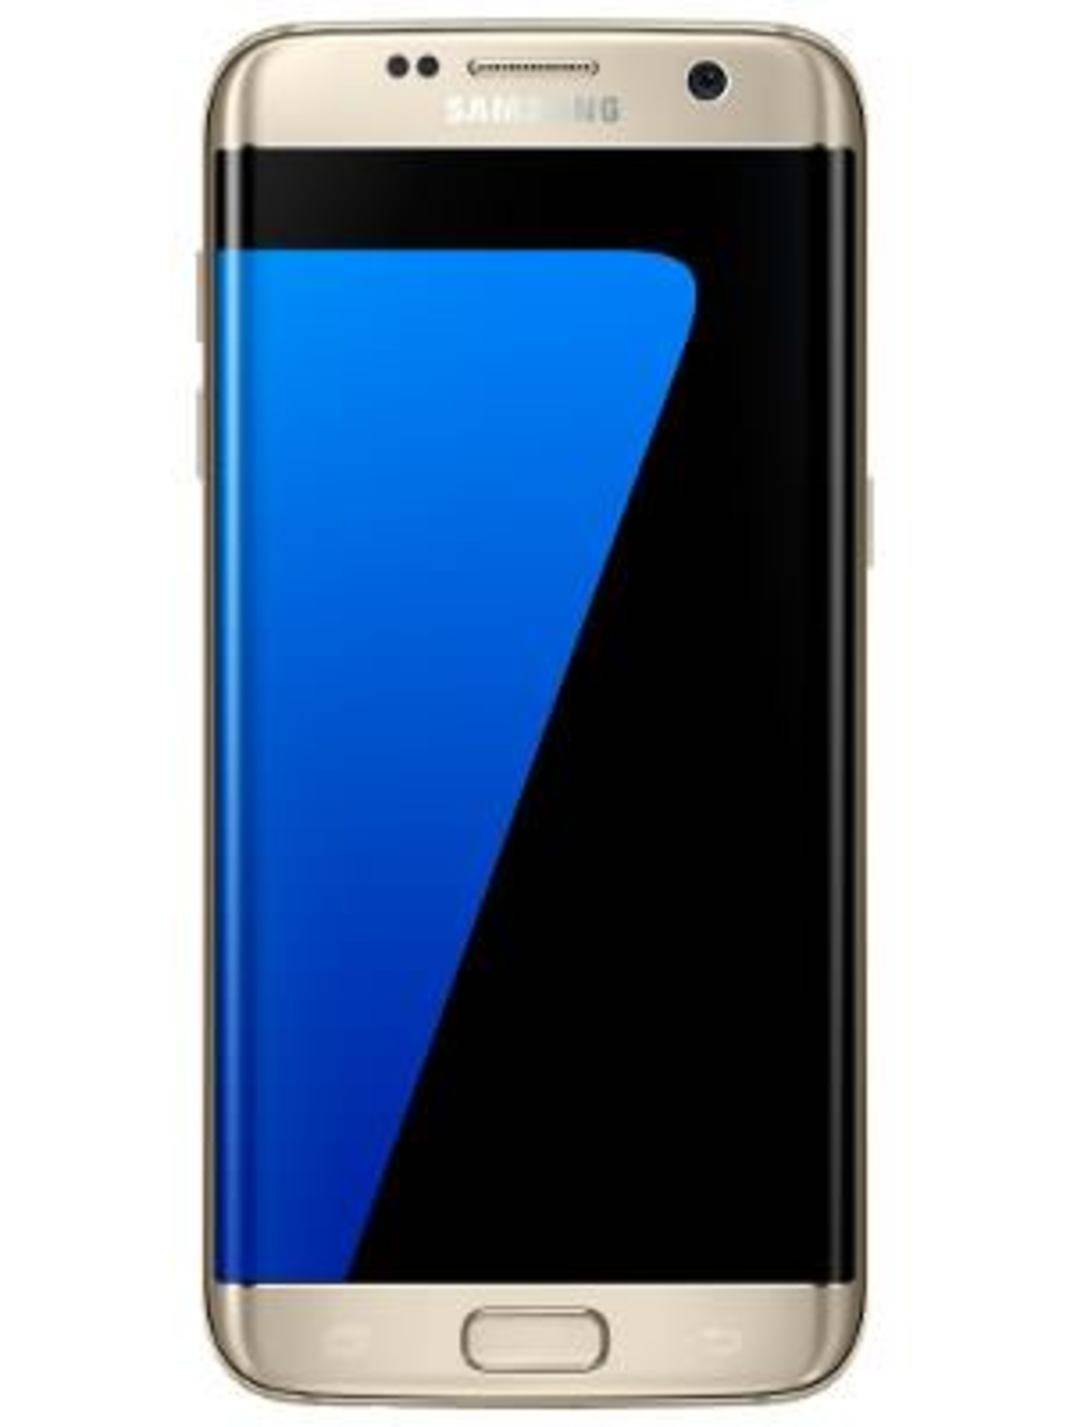 Samsung Galaxy S7 vs Samsung Galaxy vs Samsung Galaxy S9: Compare Specifications, | Now